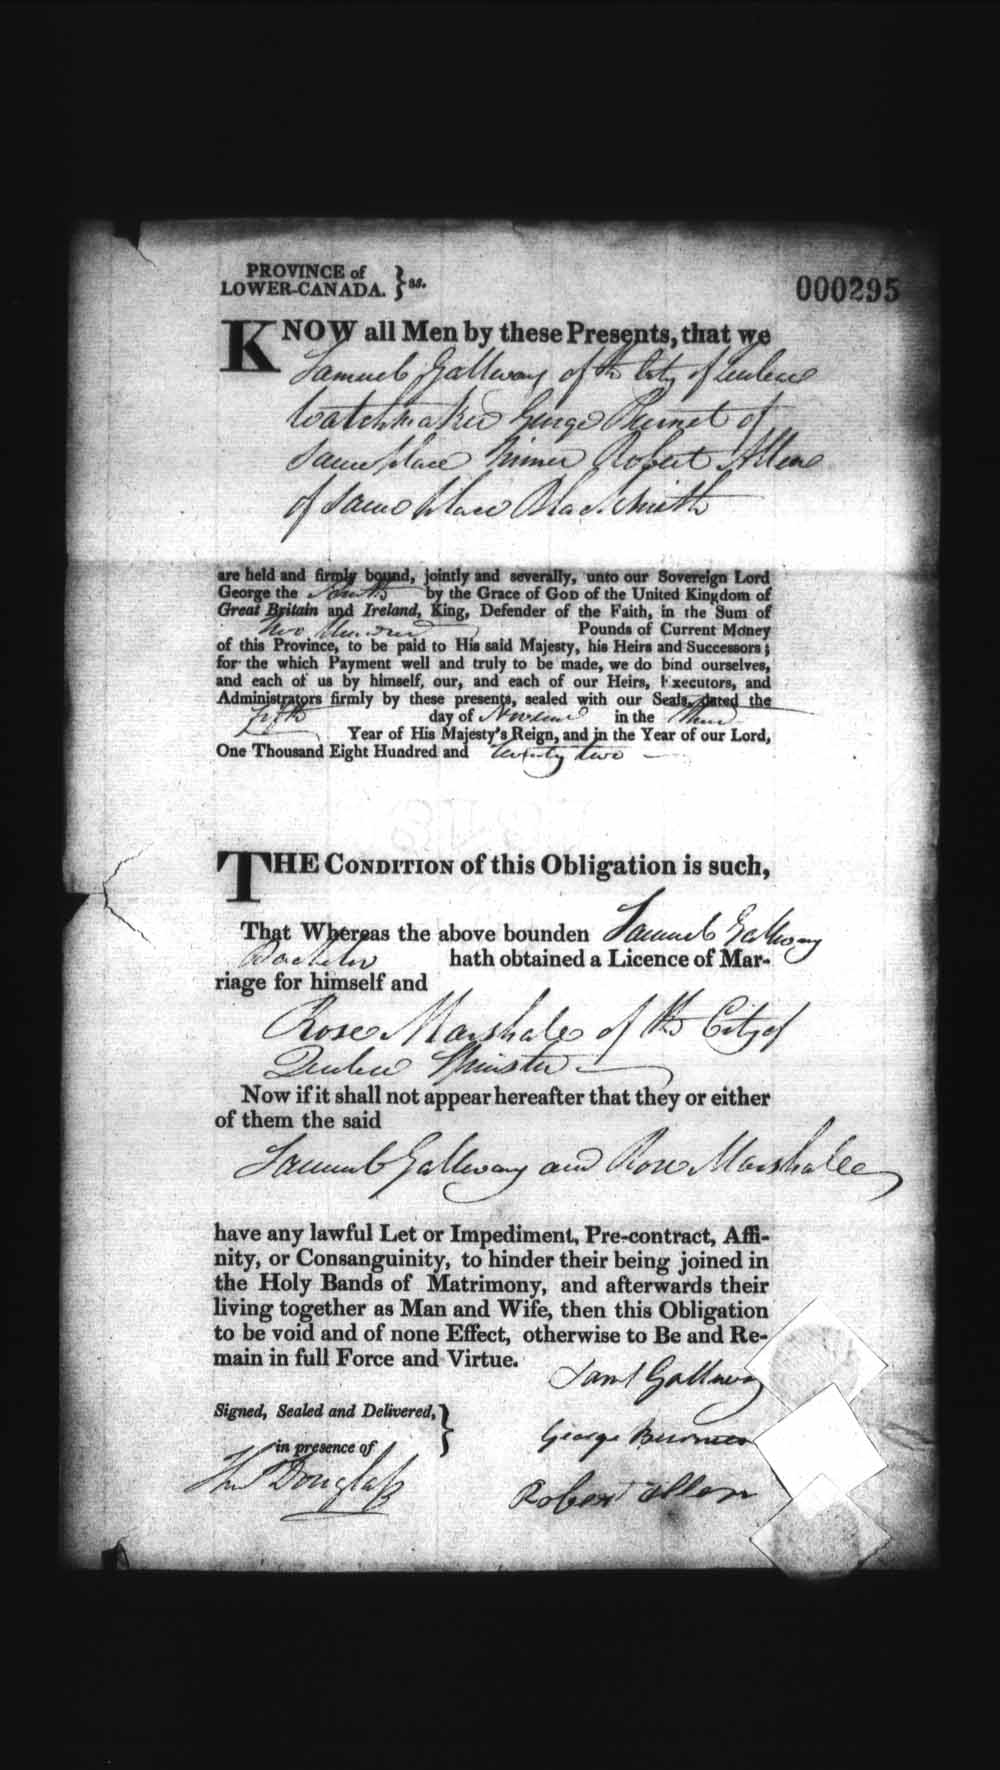 Digitized page of Upper and Lower Canada Marriage Bonds (1779-1865) for Image No.: e008236170